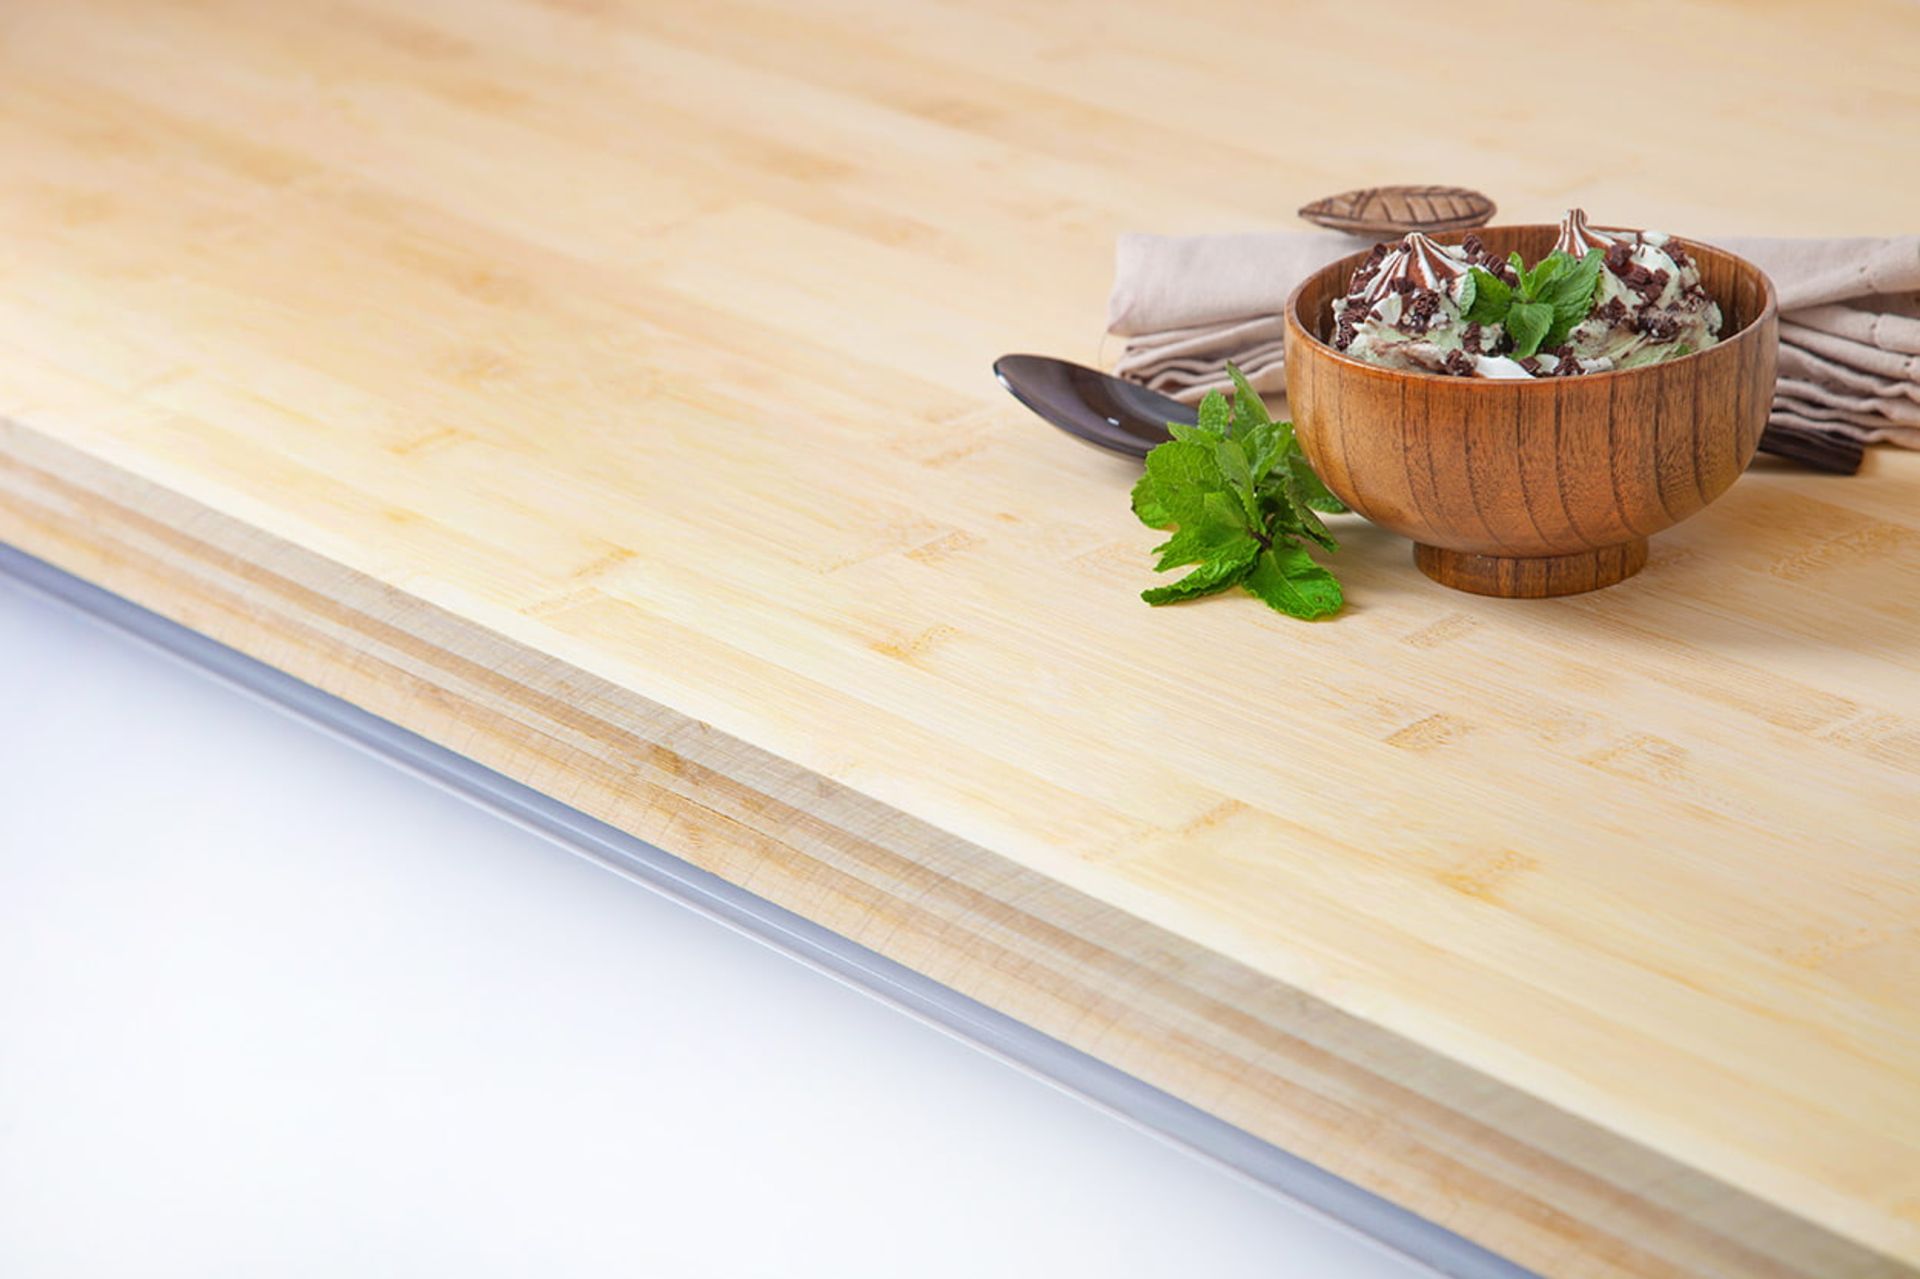 1 x Layered Solid Bamboo Wood Worktop - Size: 3000 x 900 x 40mm - Ideal For Kitchens, Countertops, - Image 3 of 4